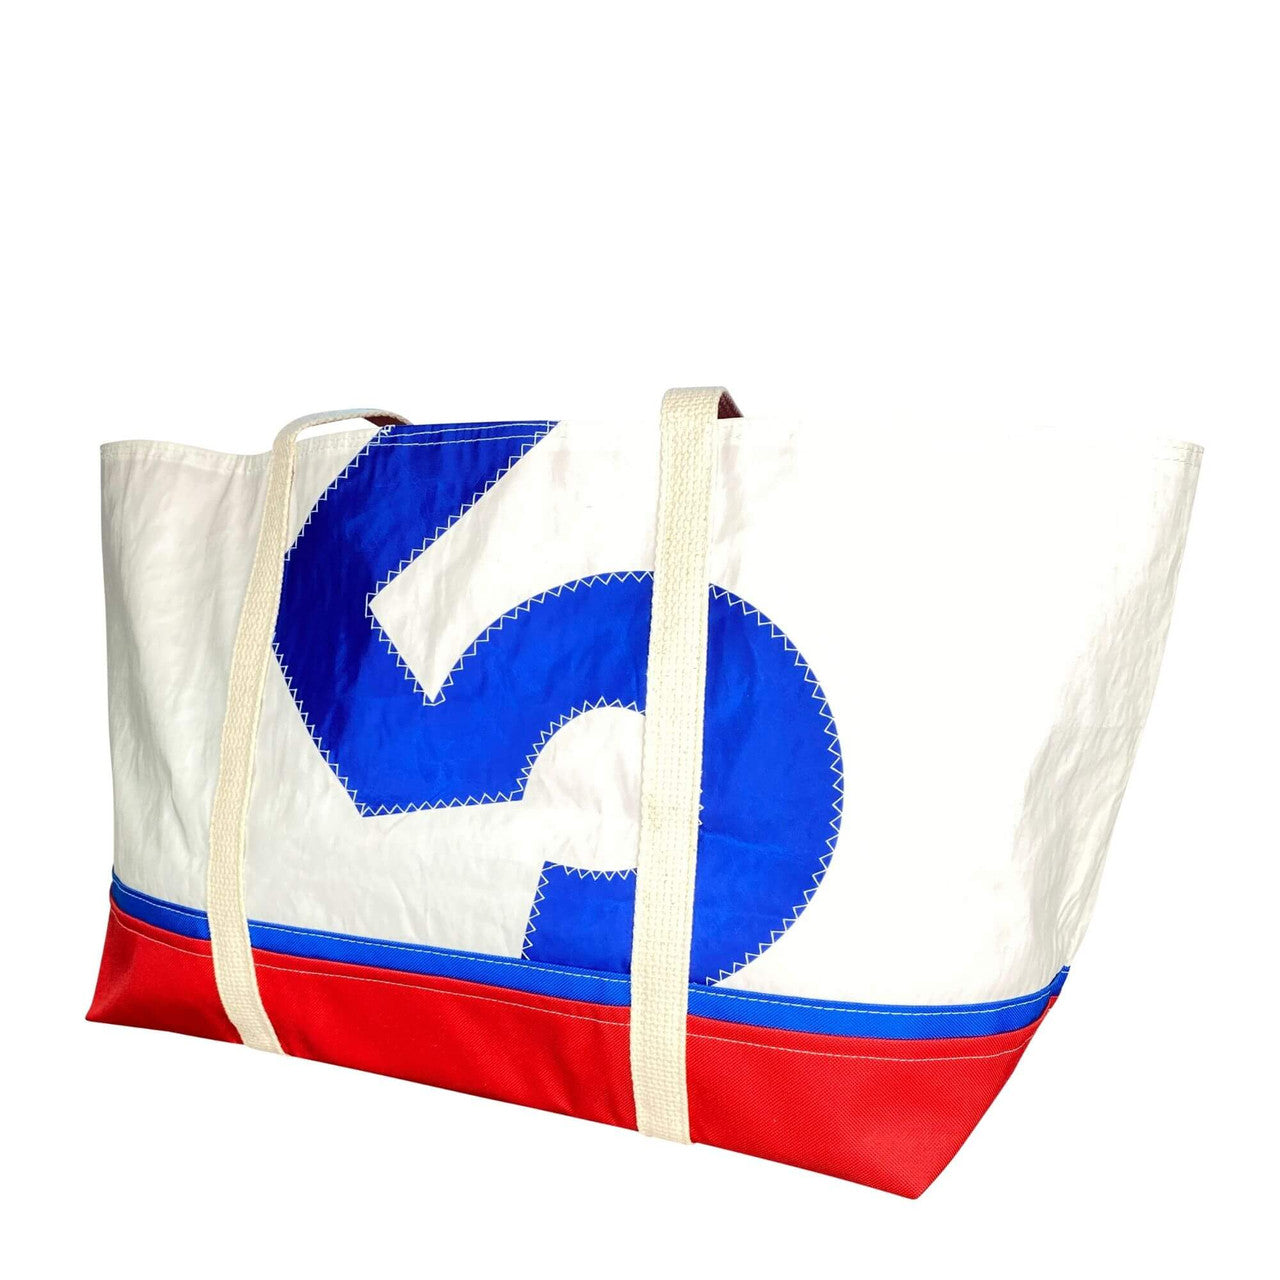 Recycled Sail Bag, Tote Bag Handmade from Sails, Blue & Red – New